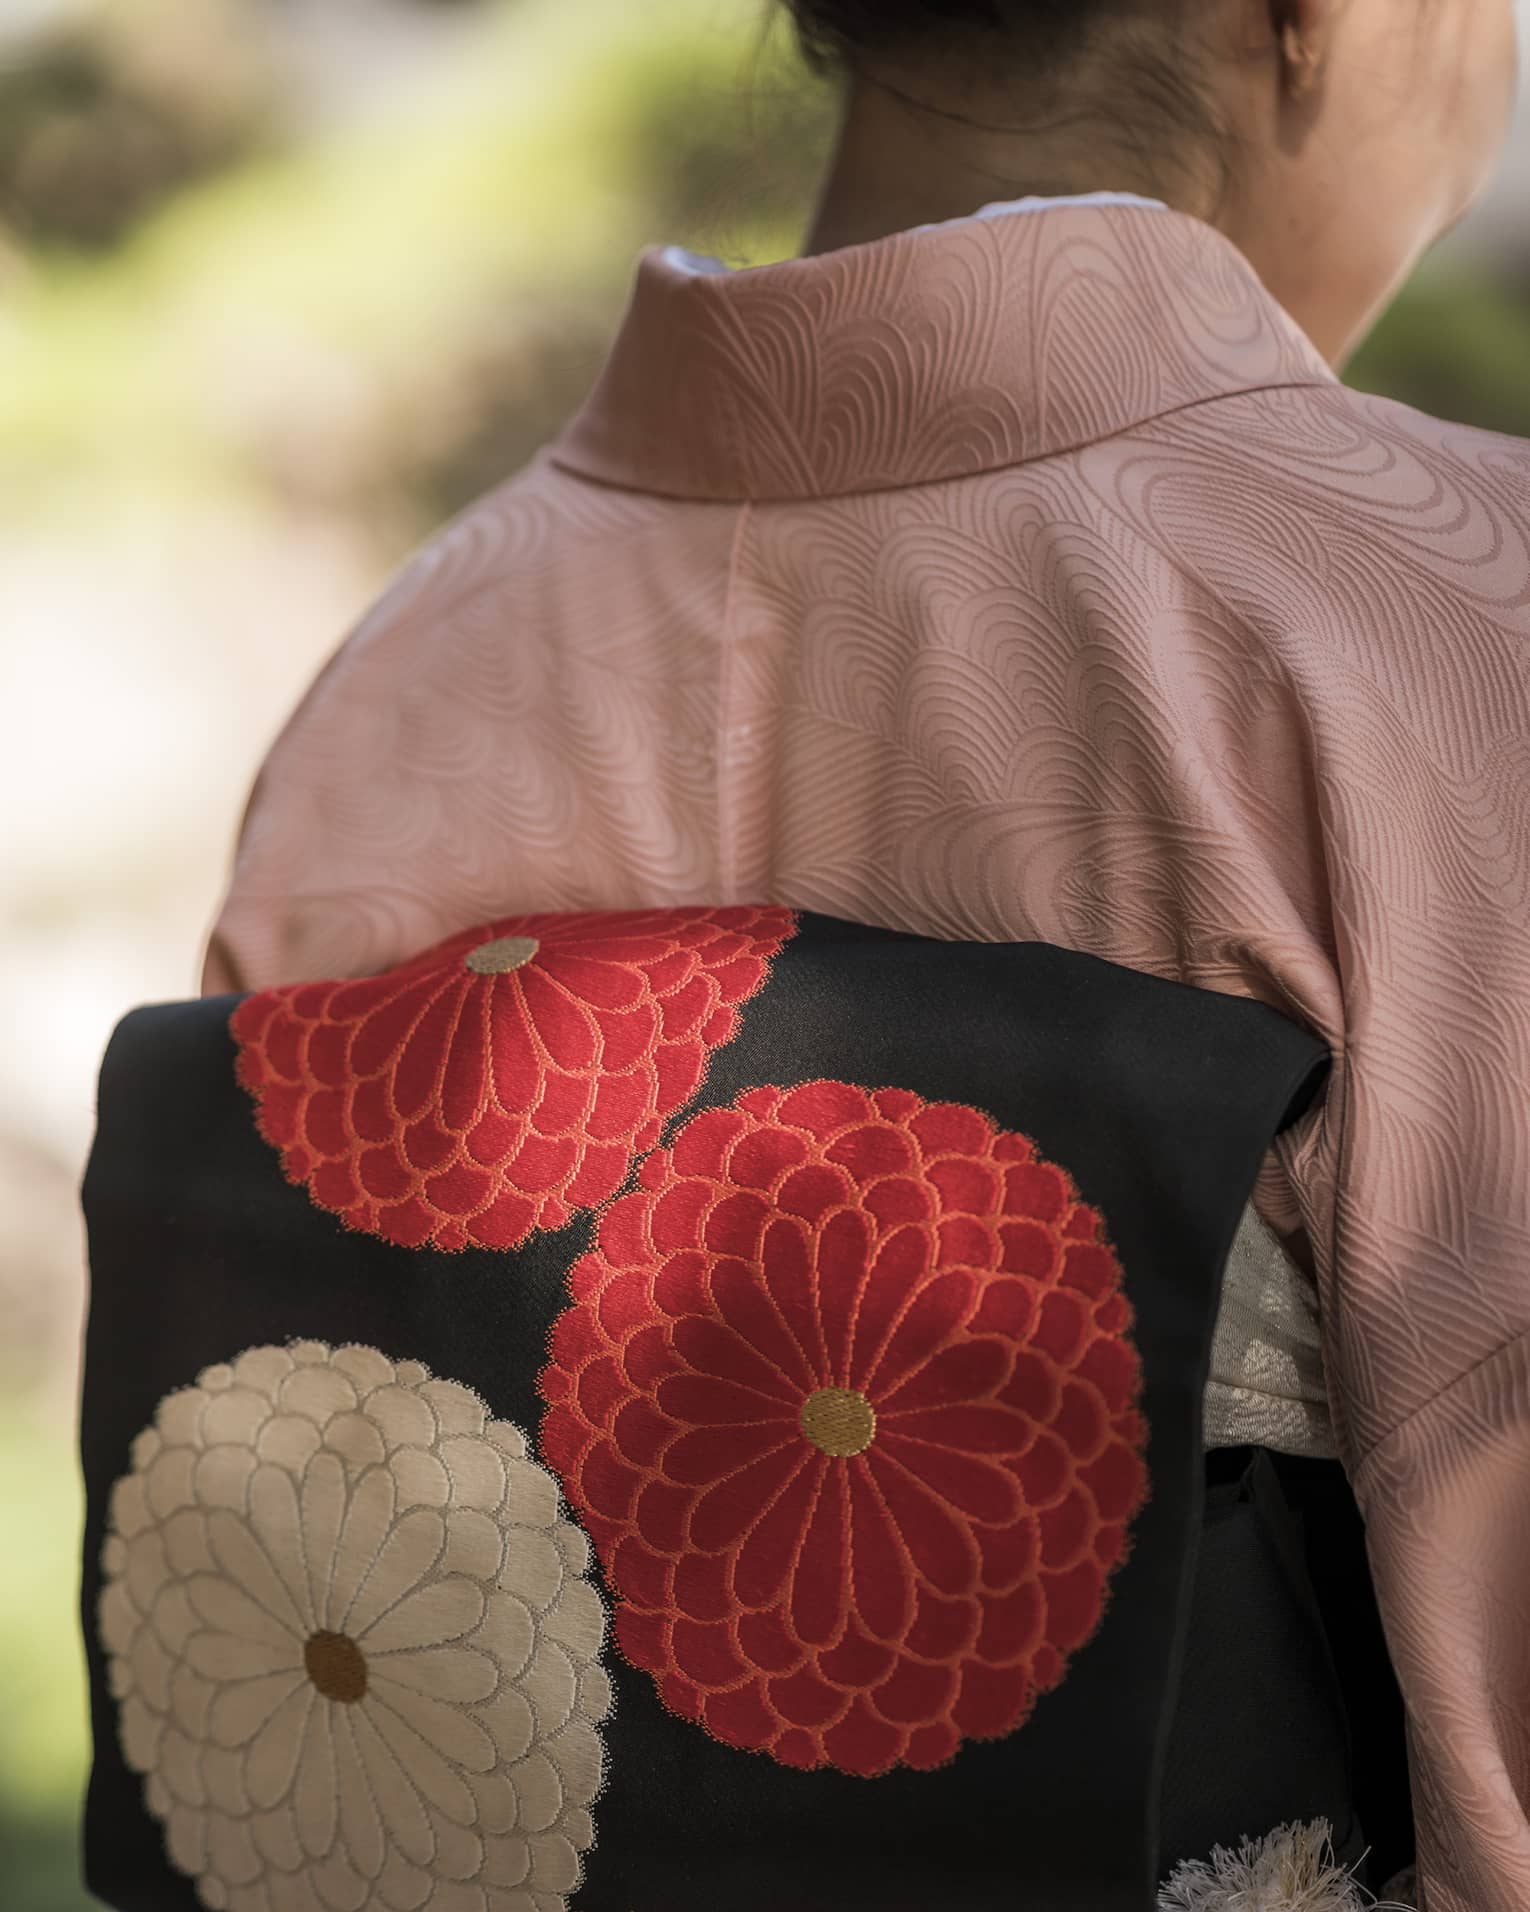 Close-up rear view of a person in a pink kimono with graphic pink and white chrysanthemums on the attached black obi cushion.